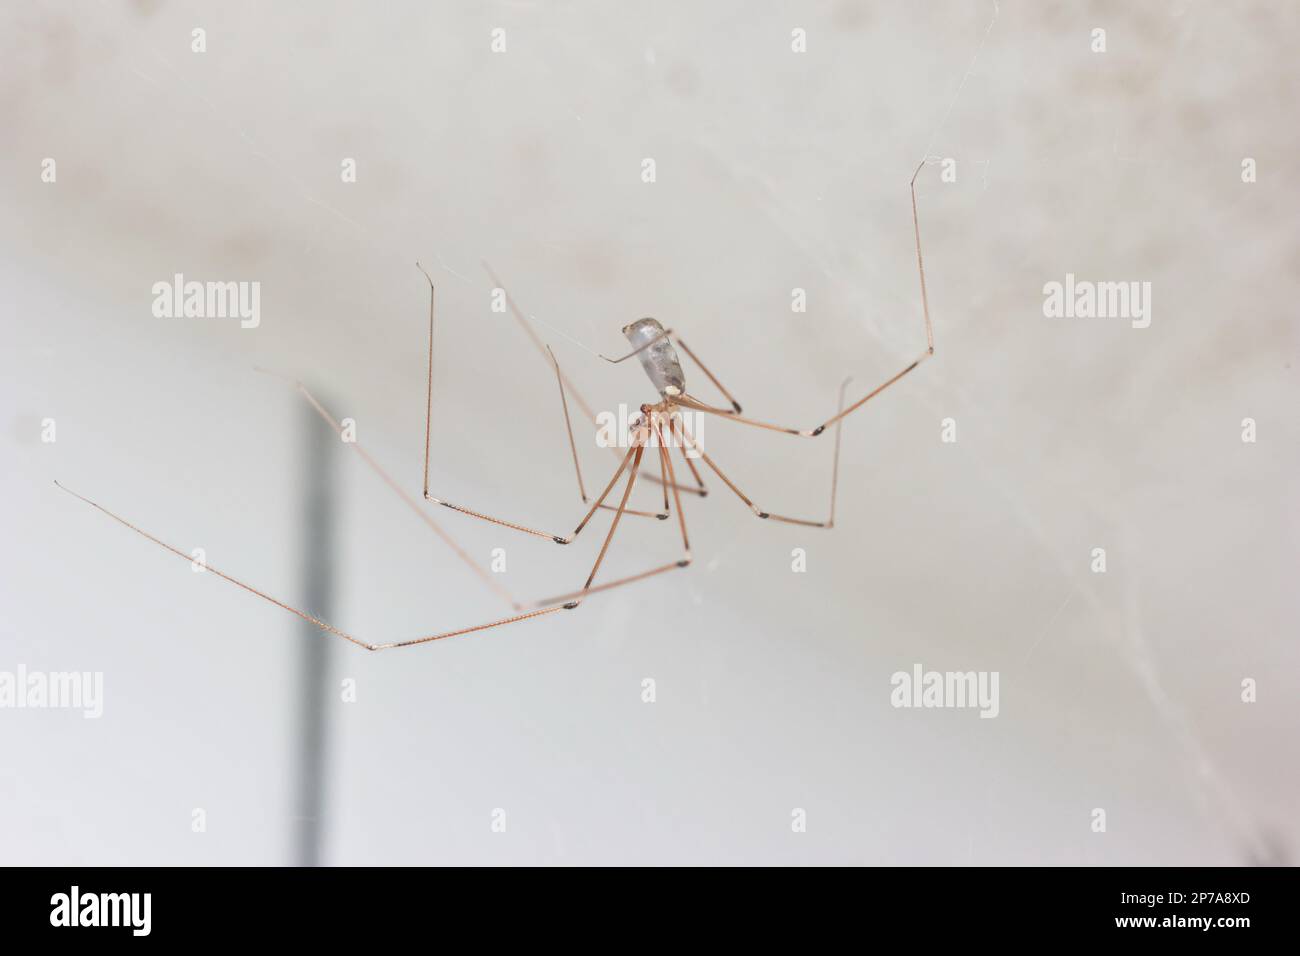 Long legged common spider making web in a household bathroom close up macro shot, no people. Stock Photo